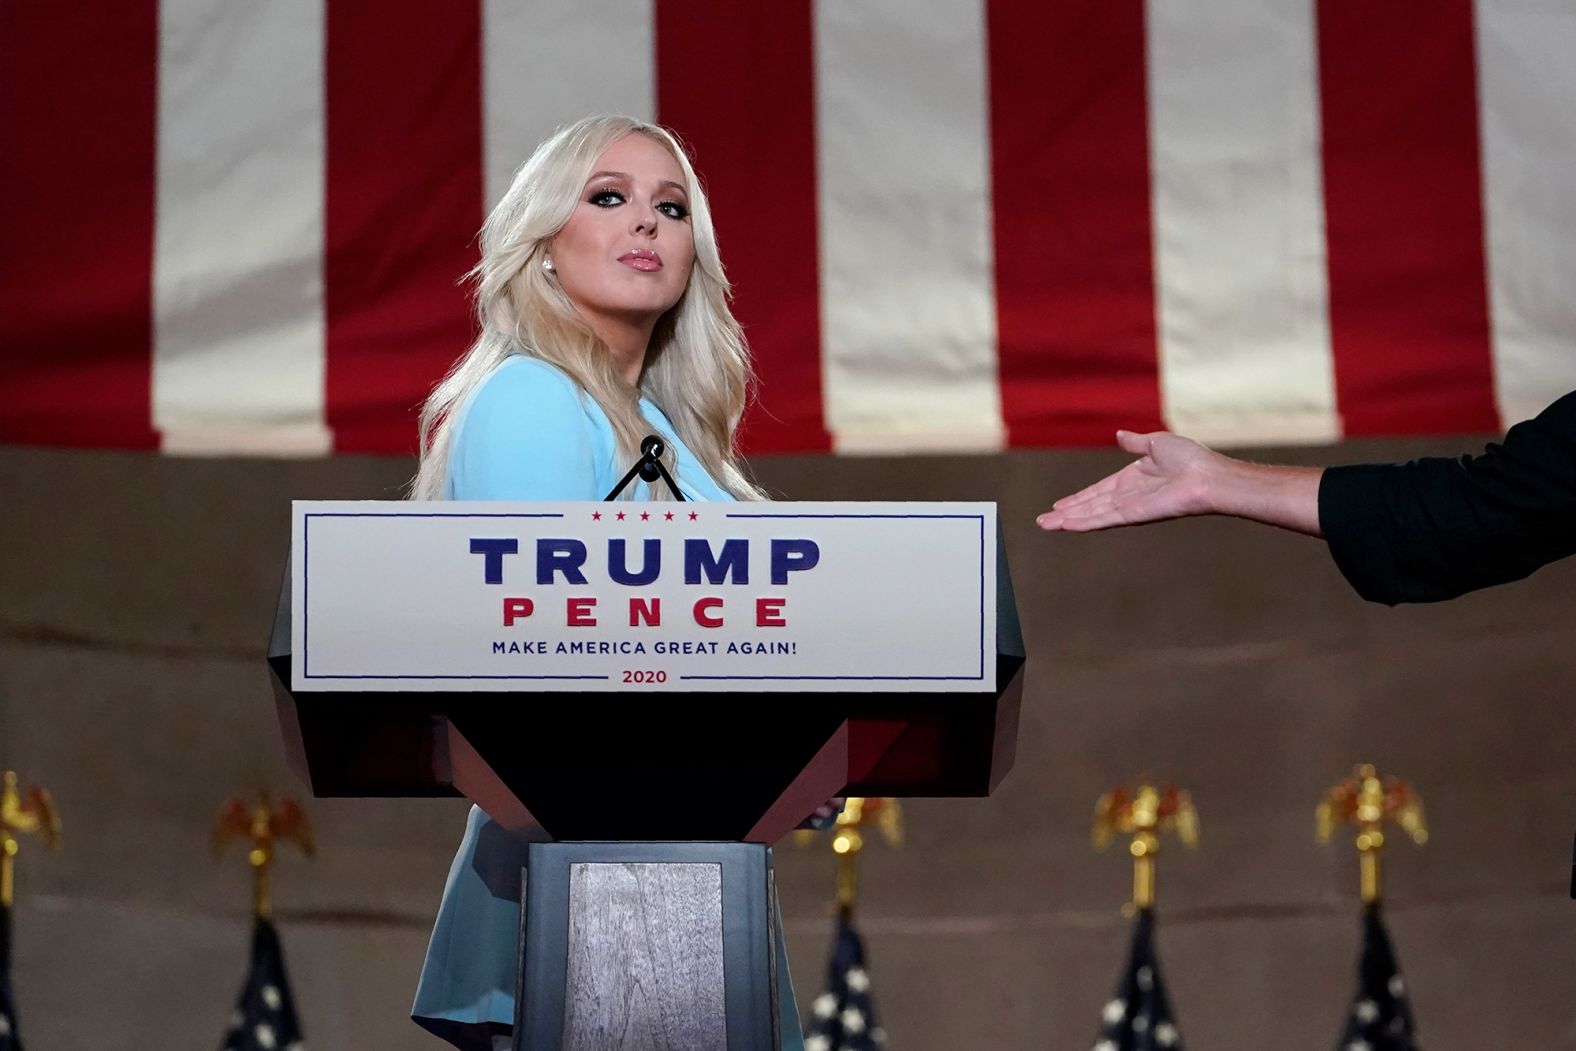 Trump's youngest daughter, Tiffany, spoke Tuesday, making an appeal to young Americans to <a href="index.php?page=&url=https%3A%2F%2Fwww.cnn.com%2Fpolitics%2Flive-news%2Frnc-2020-day-2%2Fh_51e1bdff4c318b950a42f9f50cc7bd68" target="_blank">"transcend political boundaries"</a> as they cast their ballots in the November election. "I urge you to make your judgment based on results and not rhetoric," she said.